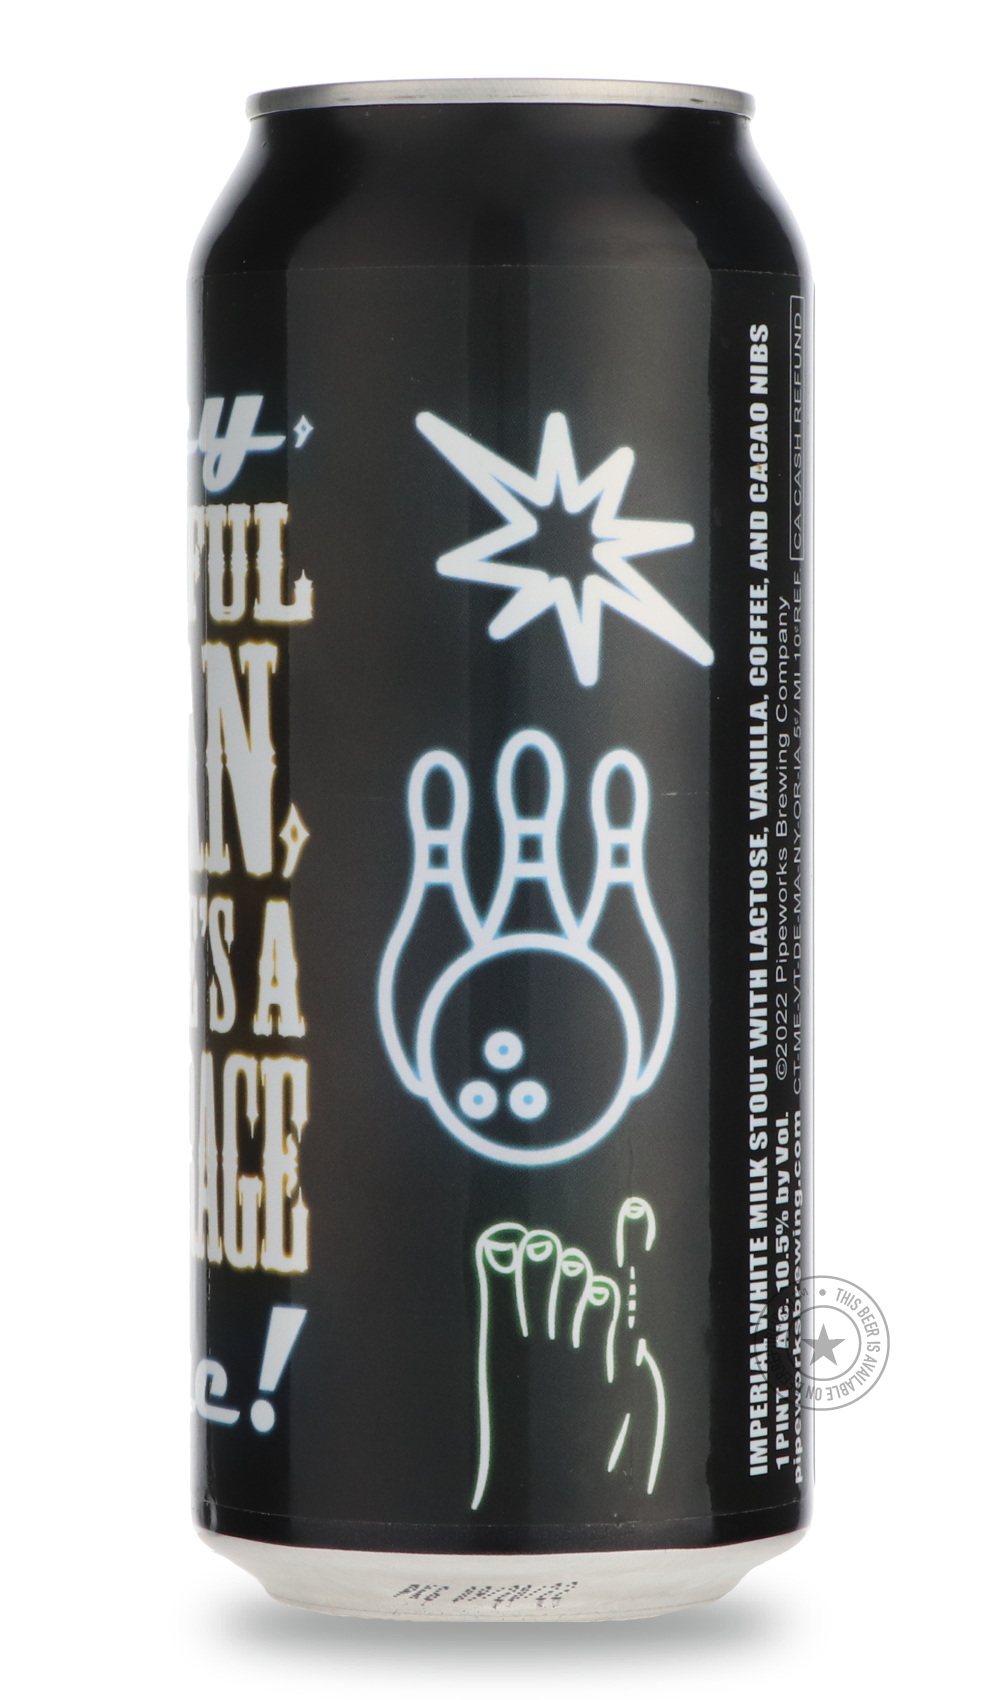 -Pipeworks- Hey, Careful Man, There’s a Beverage Here!-Stout & Porter- Only @ Beer Republic - The best online beer store for American & Canadian craft beer - Buy beer online from the USA and Canada - Bier online kopen - Amerikaans bier kopen - Craft beer store - Craft beer kopen - Amerikanisch bier kaufen - Bier online kaufen - Acheter biere online - IPA - Stout - Porter - New England IPA - Hazy IPA - Imperial Stout - Barrel Aged - Barrel Aged Imperial Stout - Brown - Dark beer - Blond - Blonde - Pilsner - 